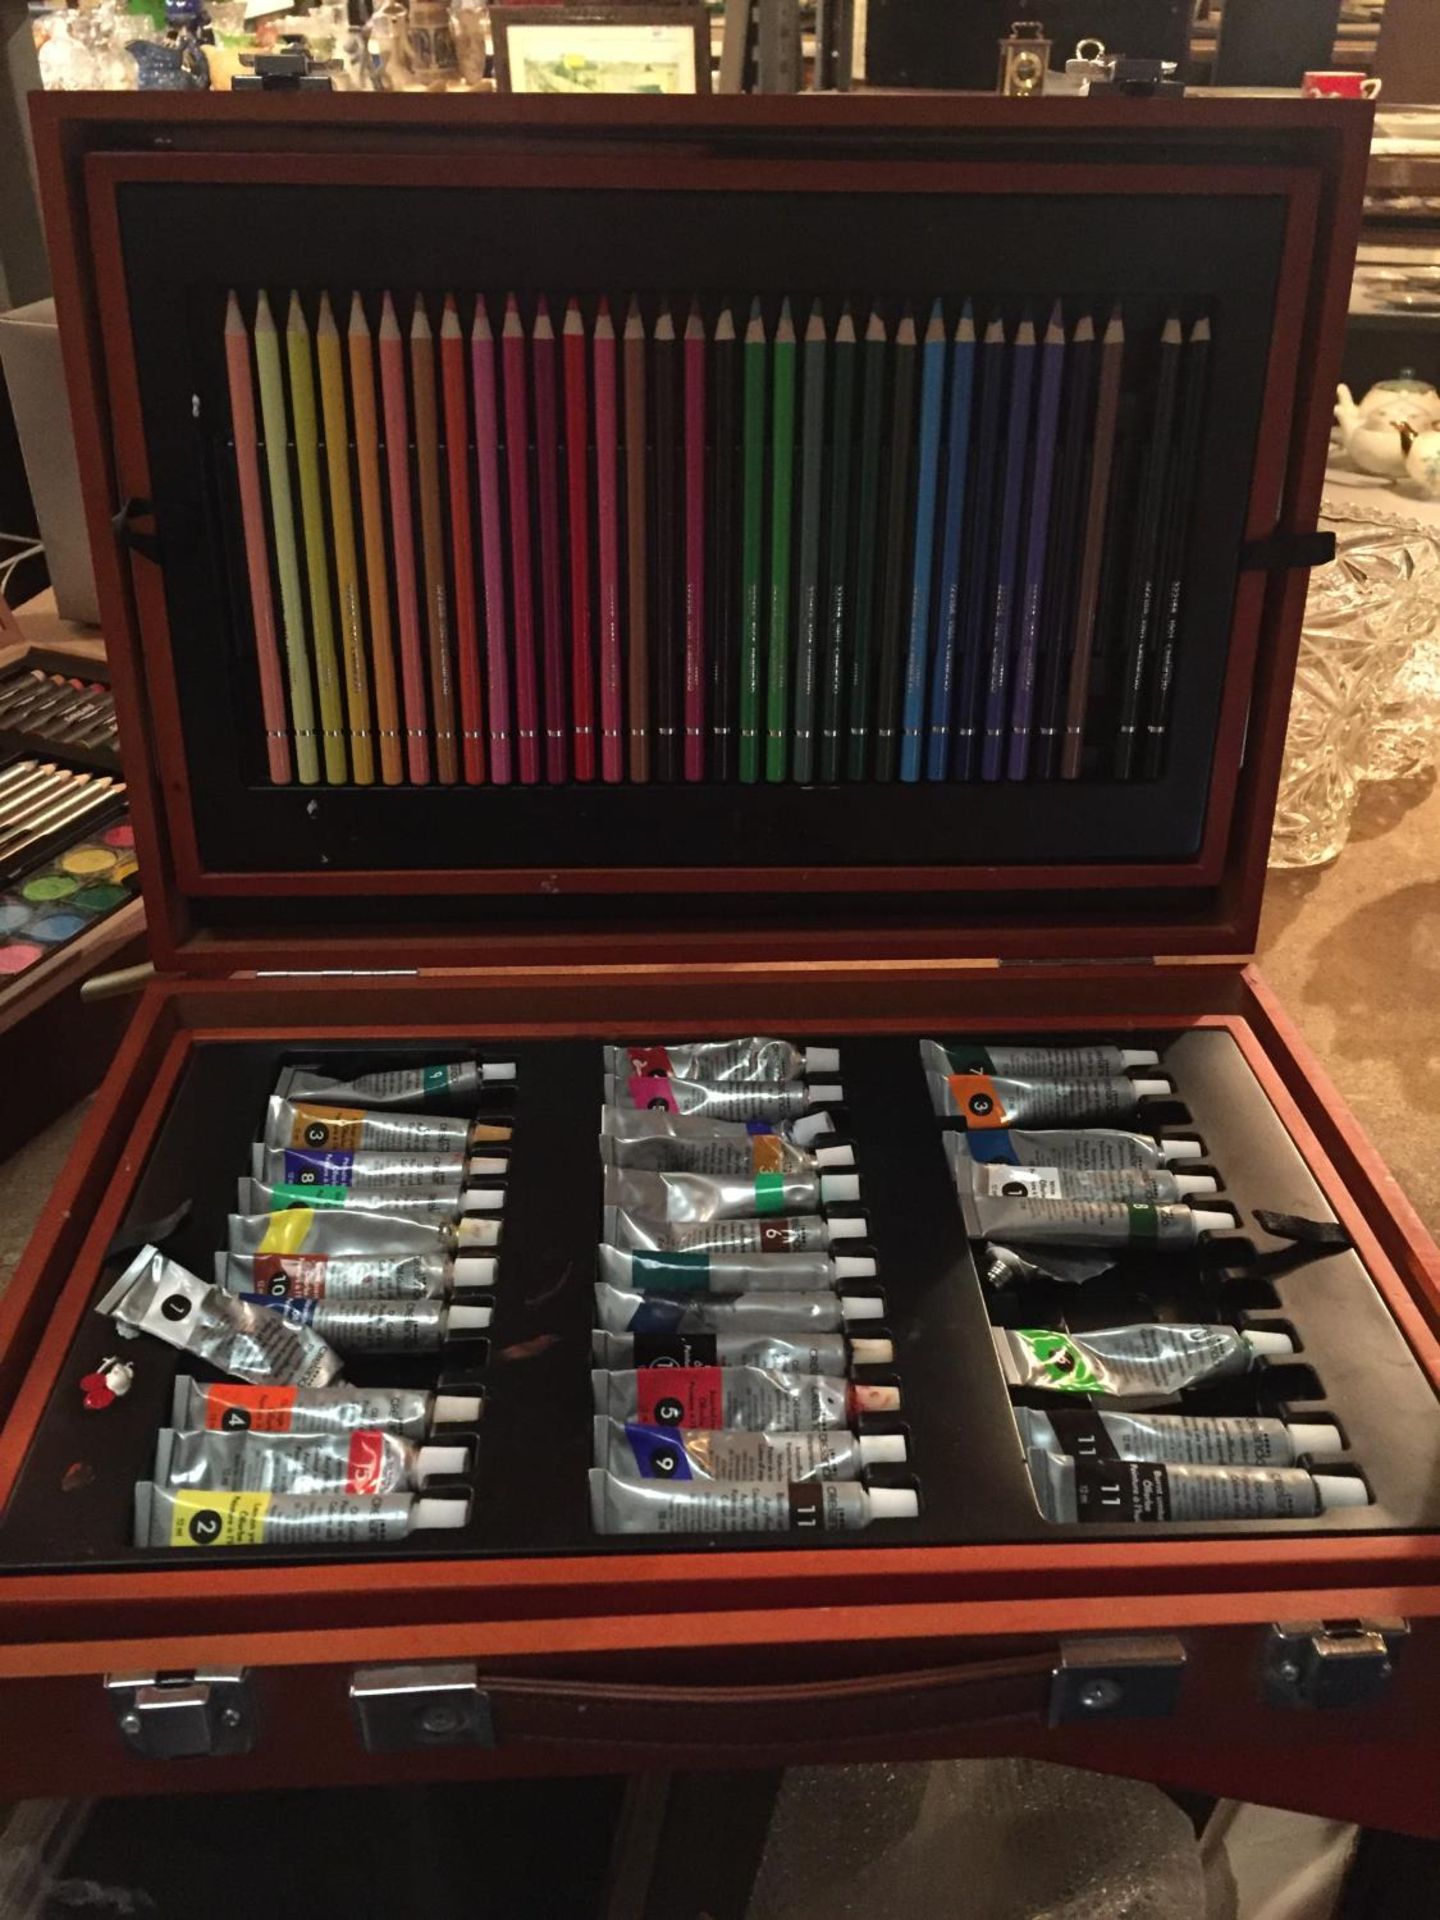 TWO CASES OF ART SUPPLIES TO INCLUDE FELT TIPS, PENCILS, OIL PAINTS ETC - Image 3 of 12